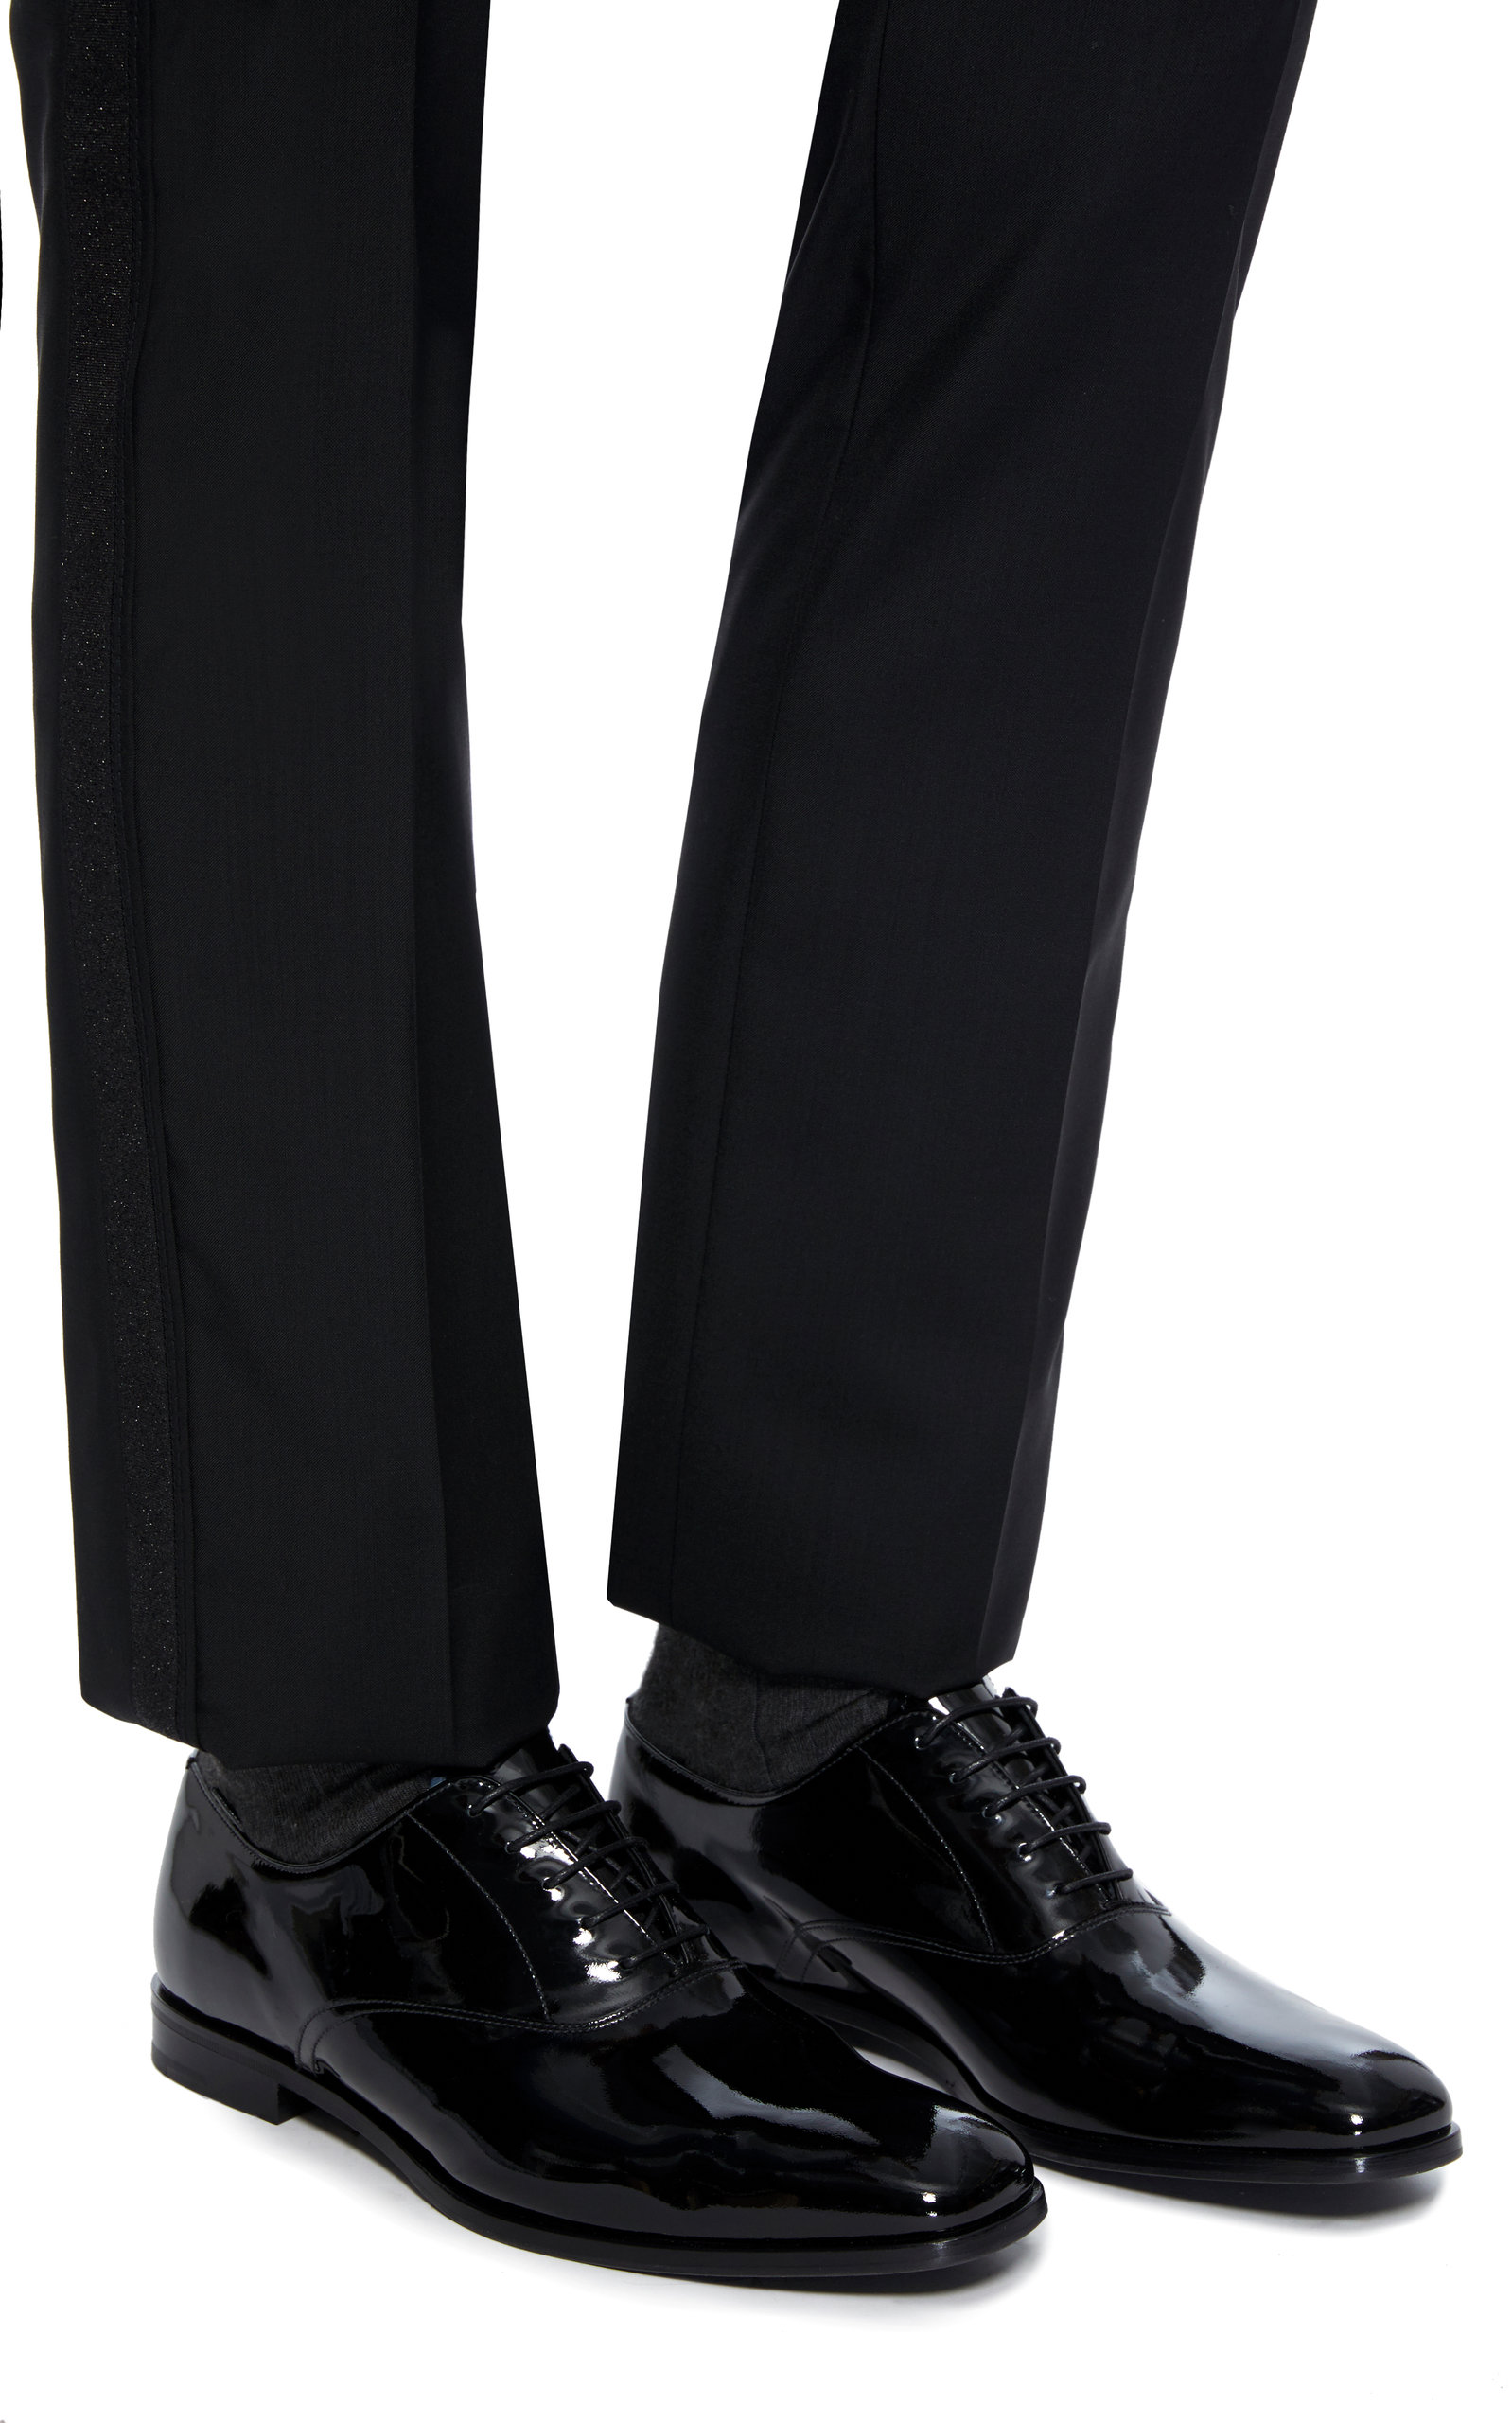 tuxedo without patent leather shoes